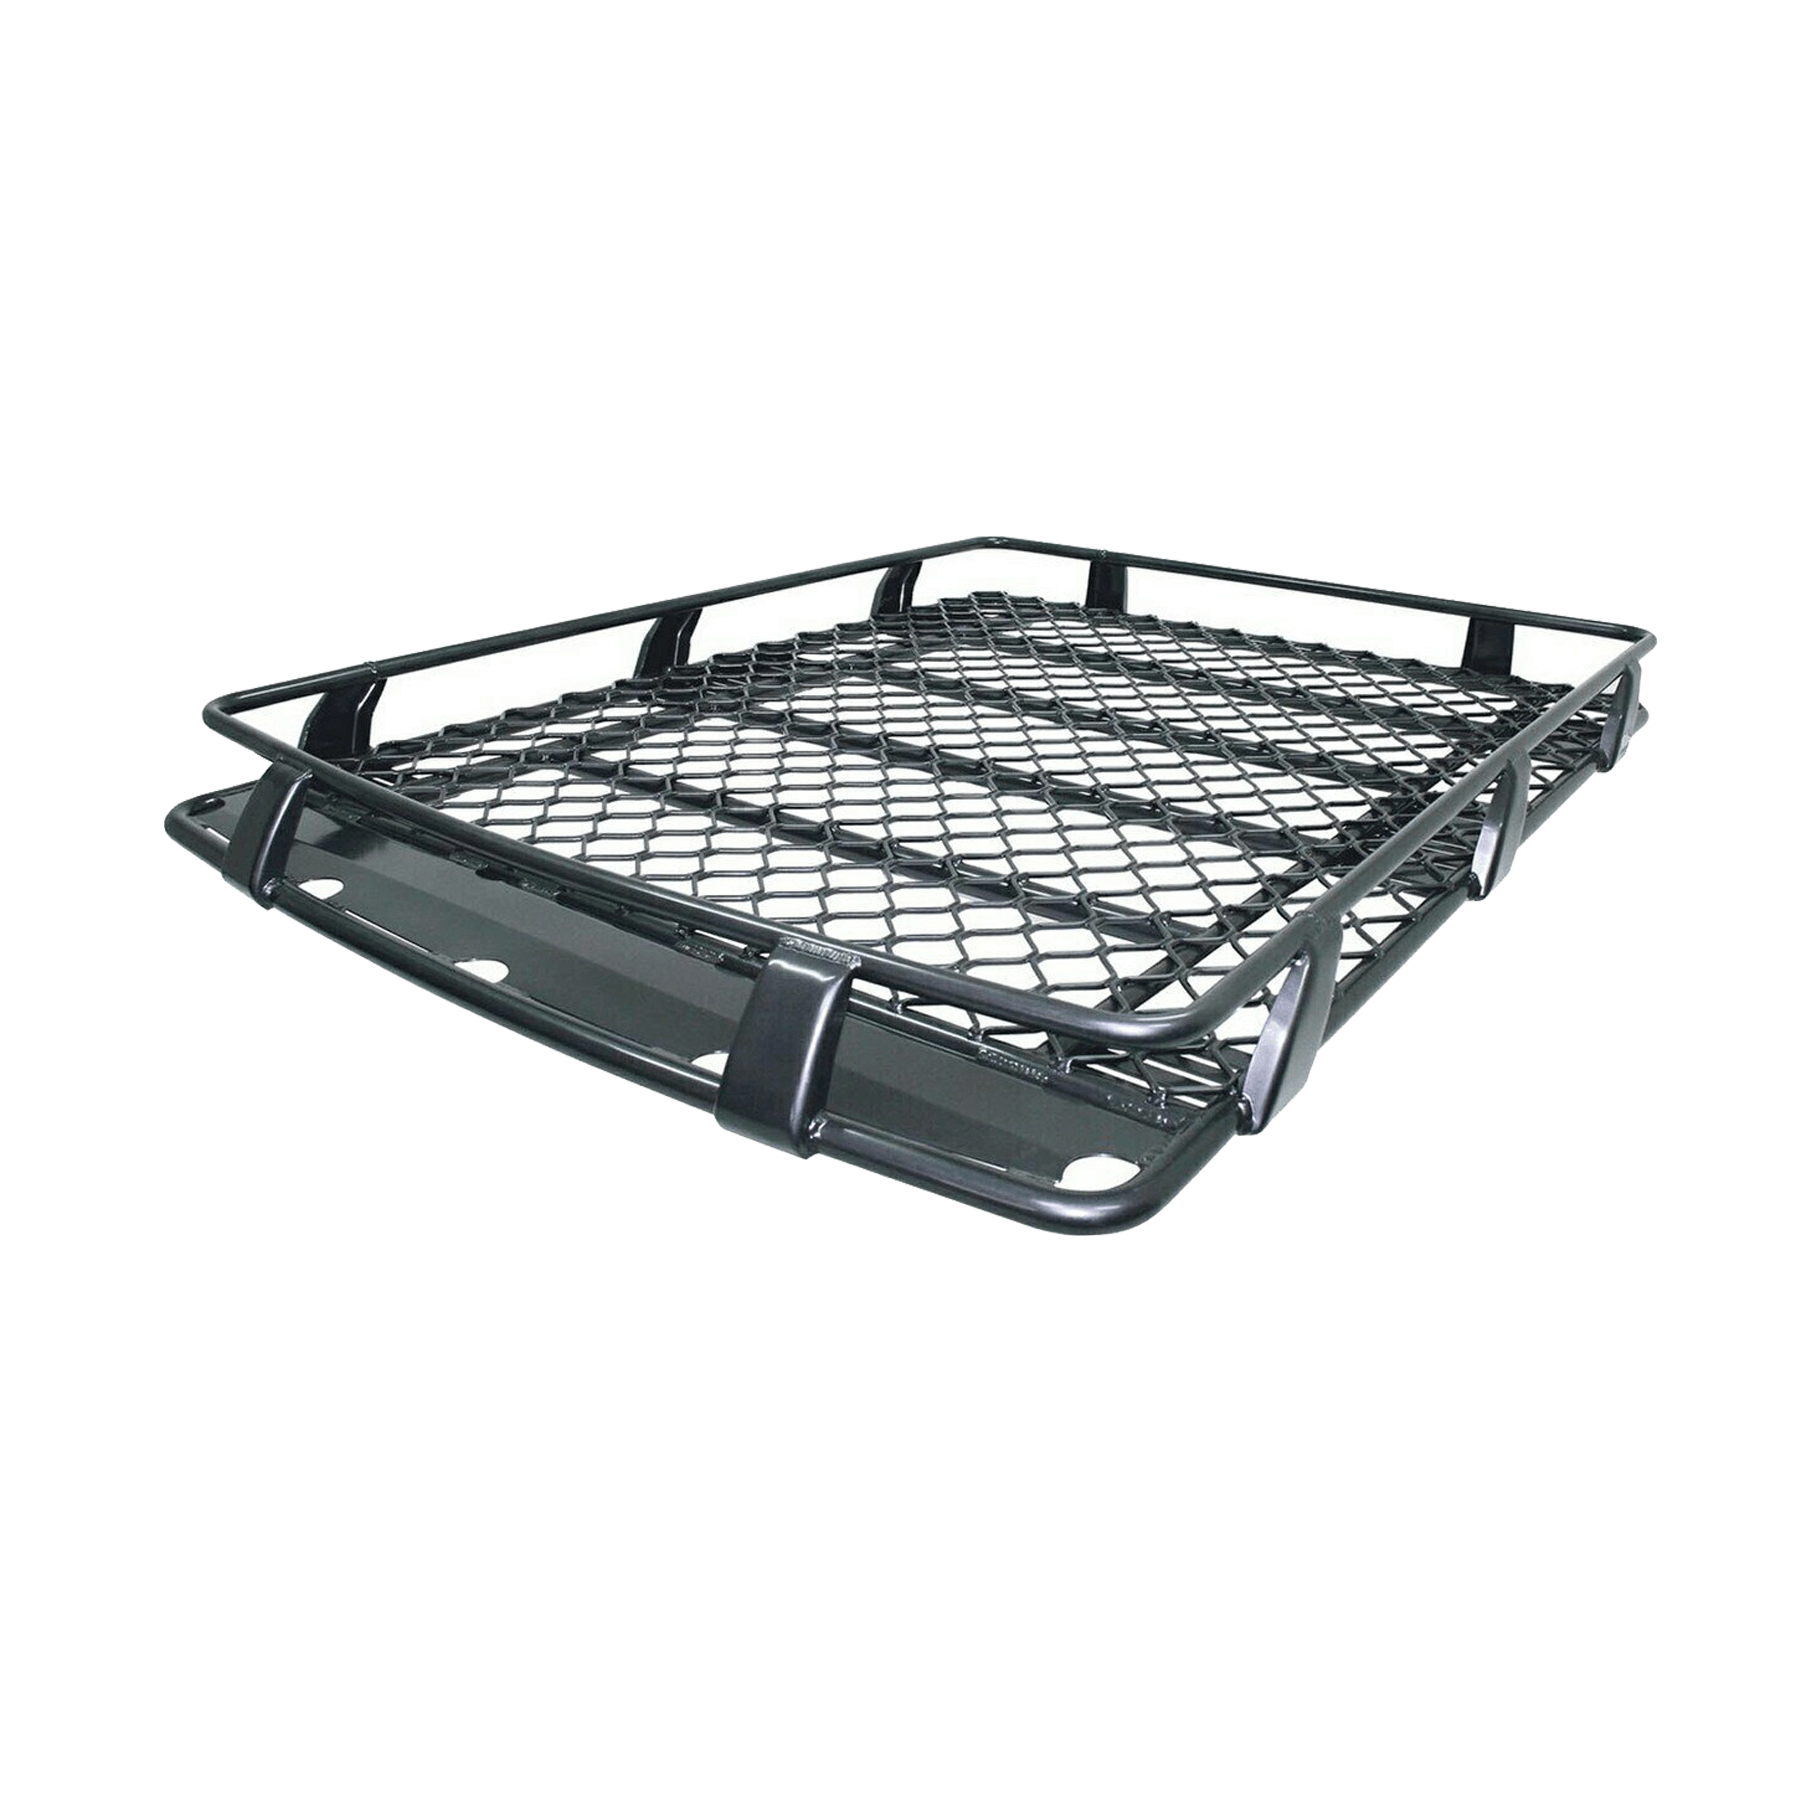 LANDCRUISER 200 SERIES 2007 TO 2015 BASKET ALLOY ROOF RACK – 1.4M X 1.25M (OPEN END)